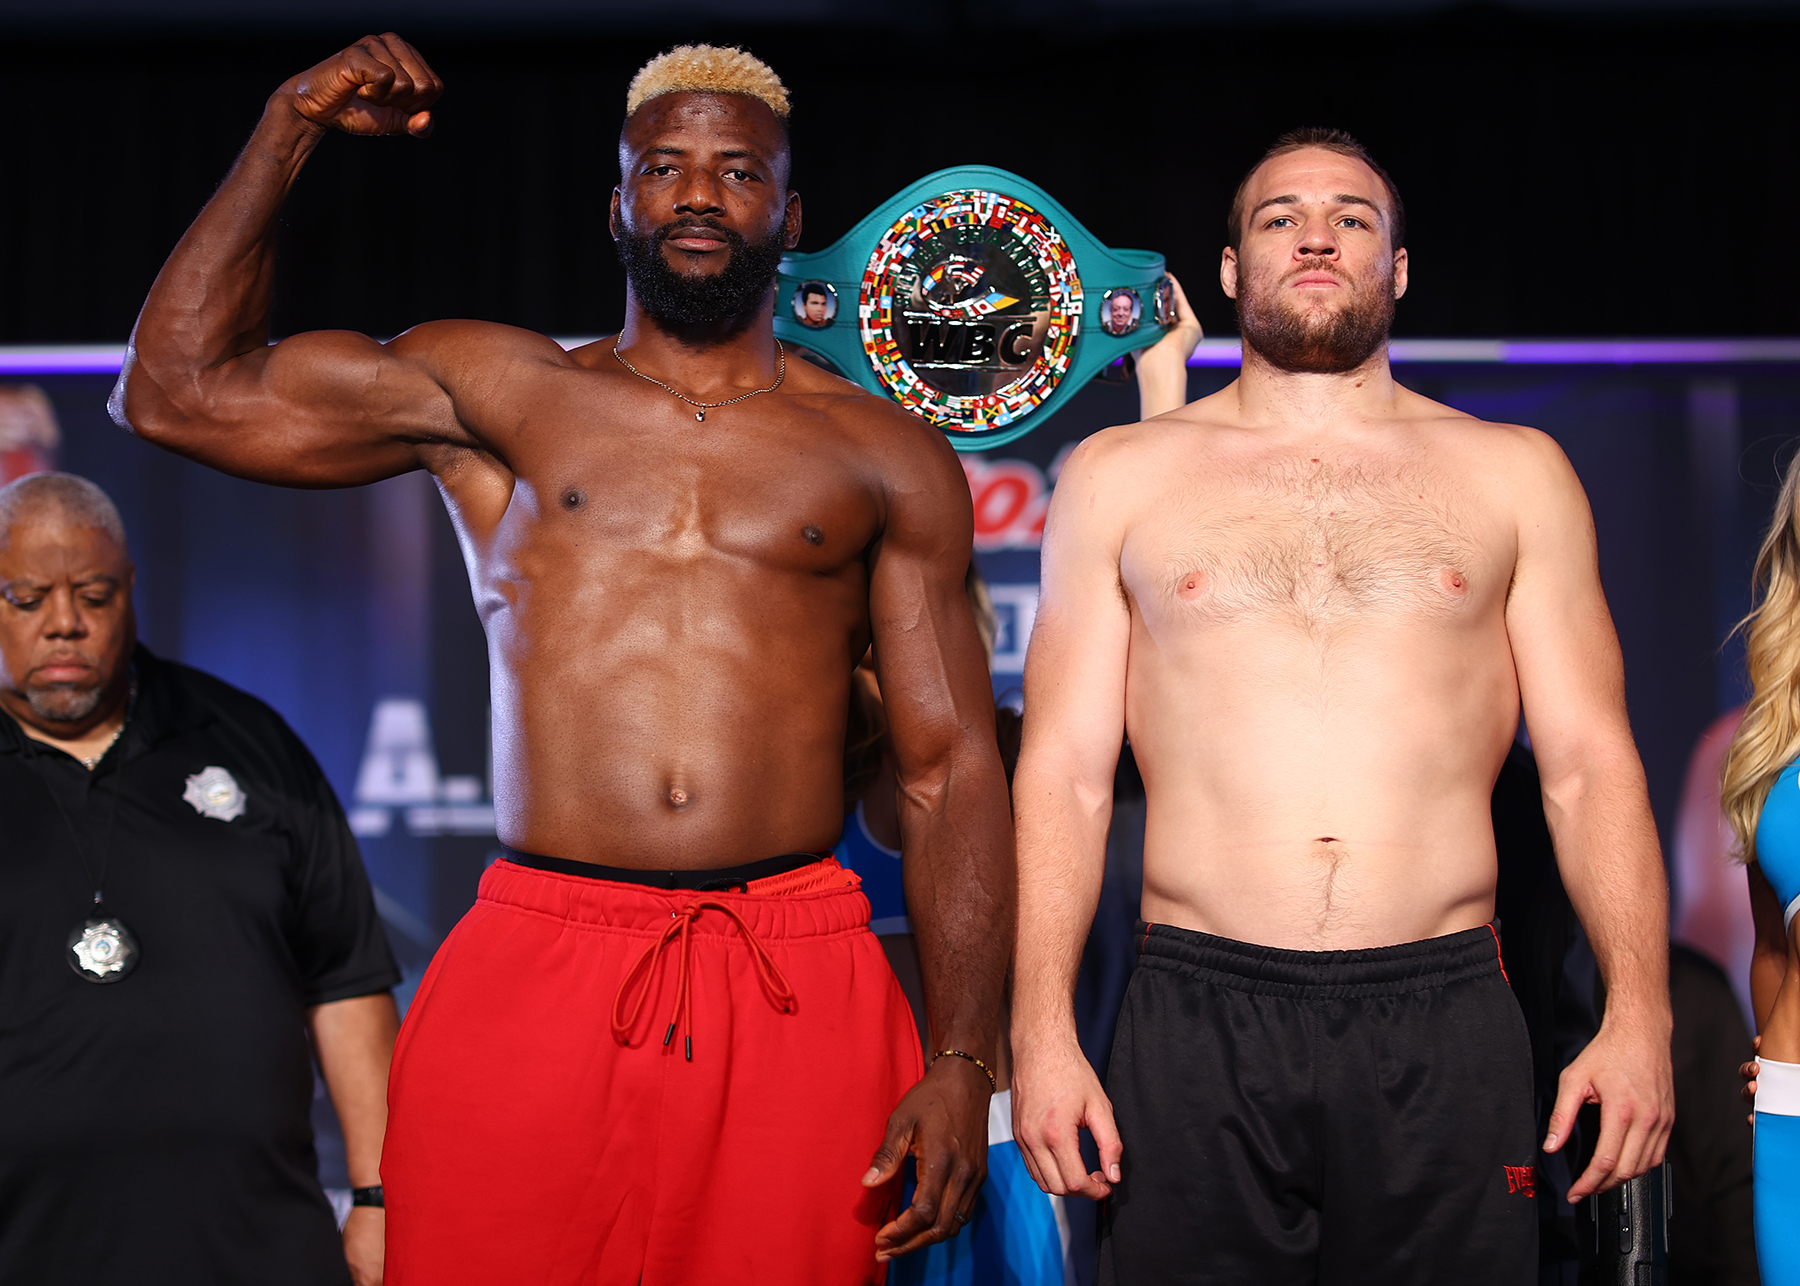 Ajagba vs. Goodall: Weigh-In Results & Betting Odds